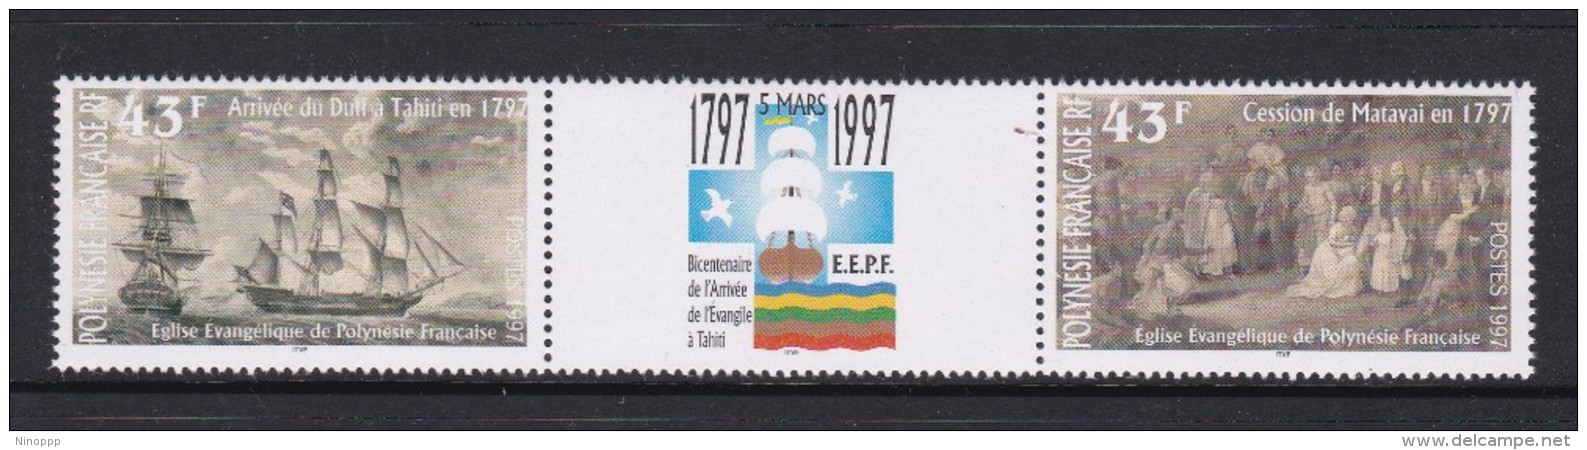 French Polynesia SG 771-72 1997 Bicentenary Of Evangelic Church MNH - Unused Stamps